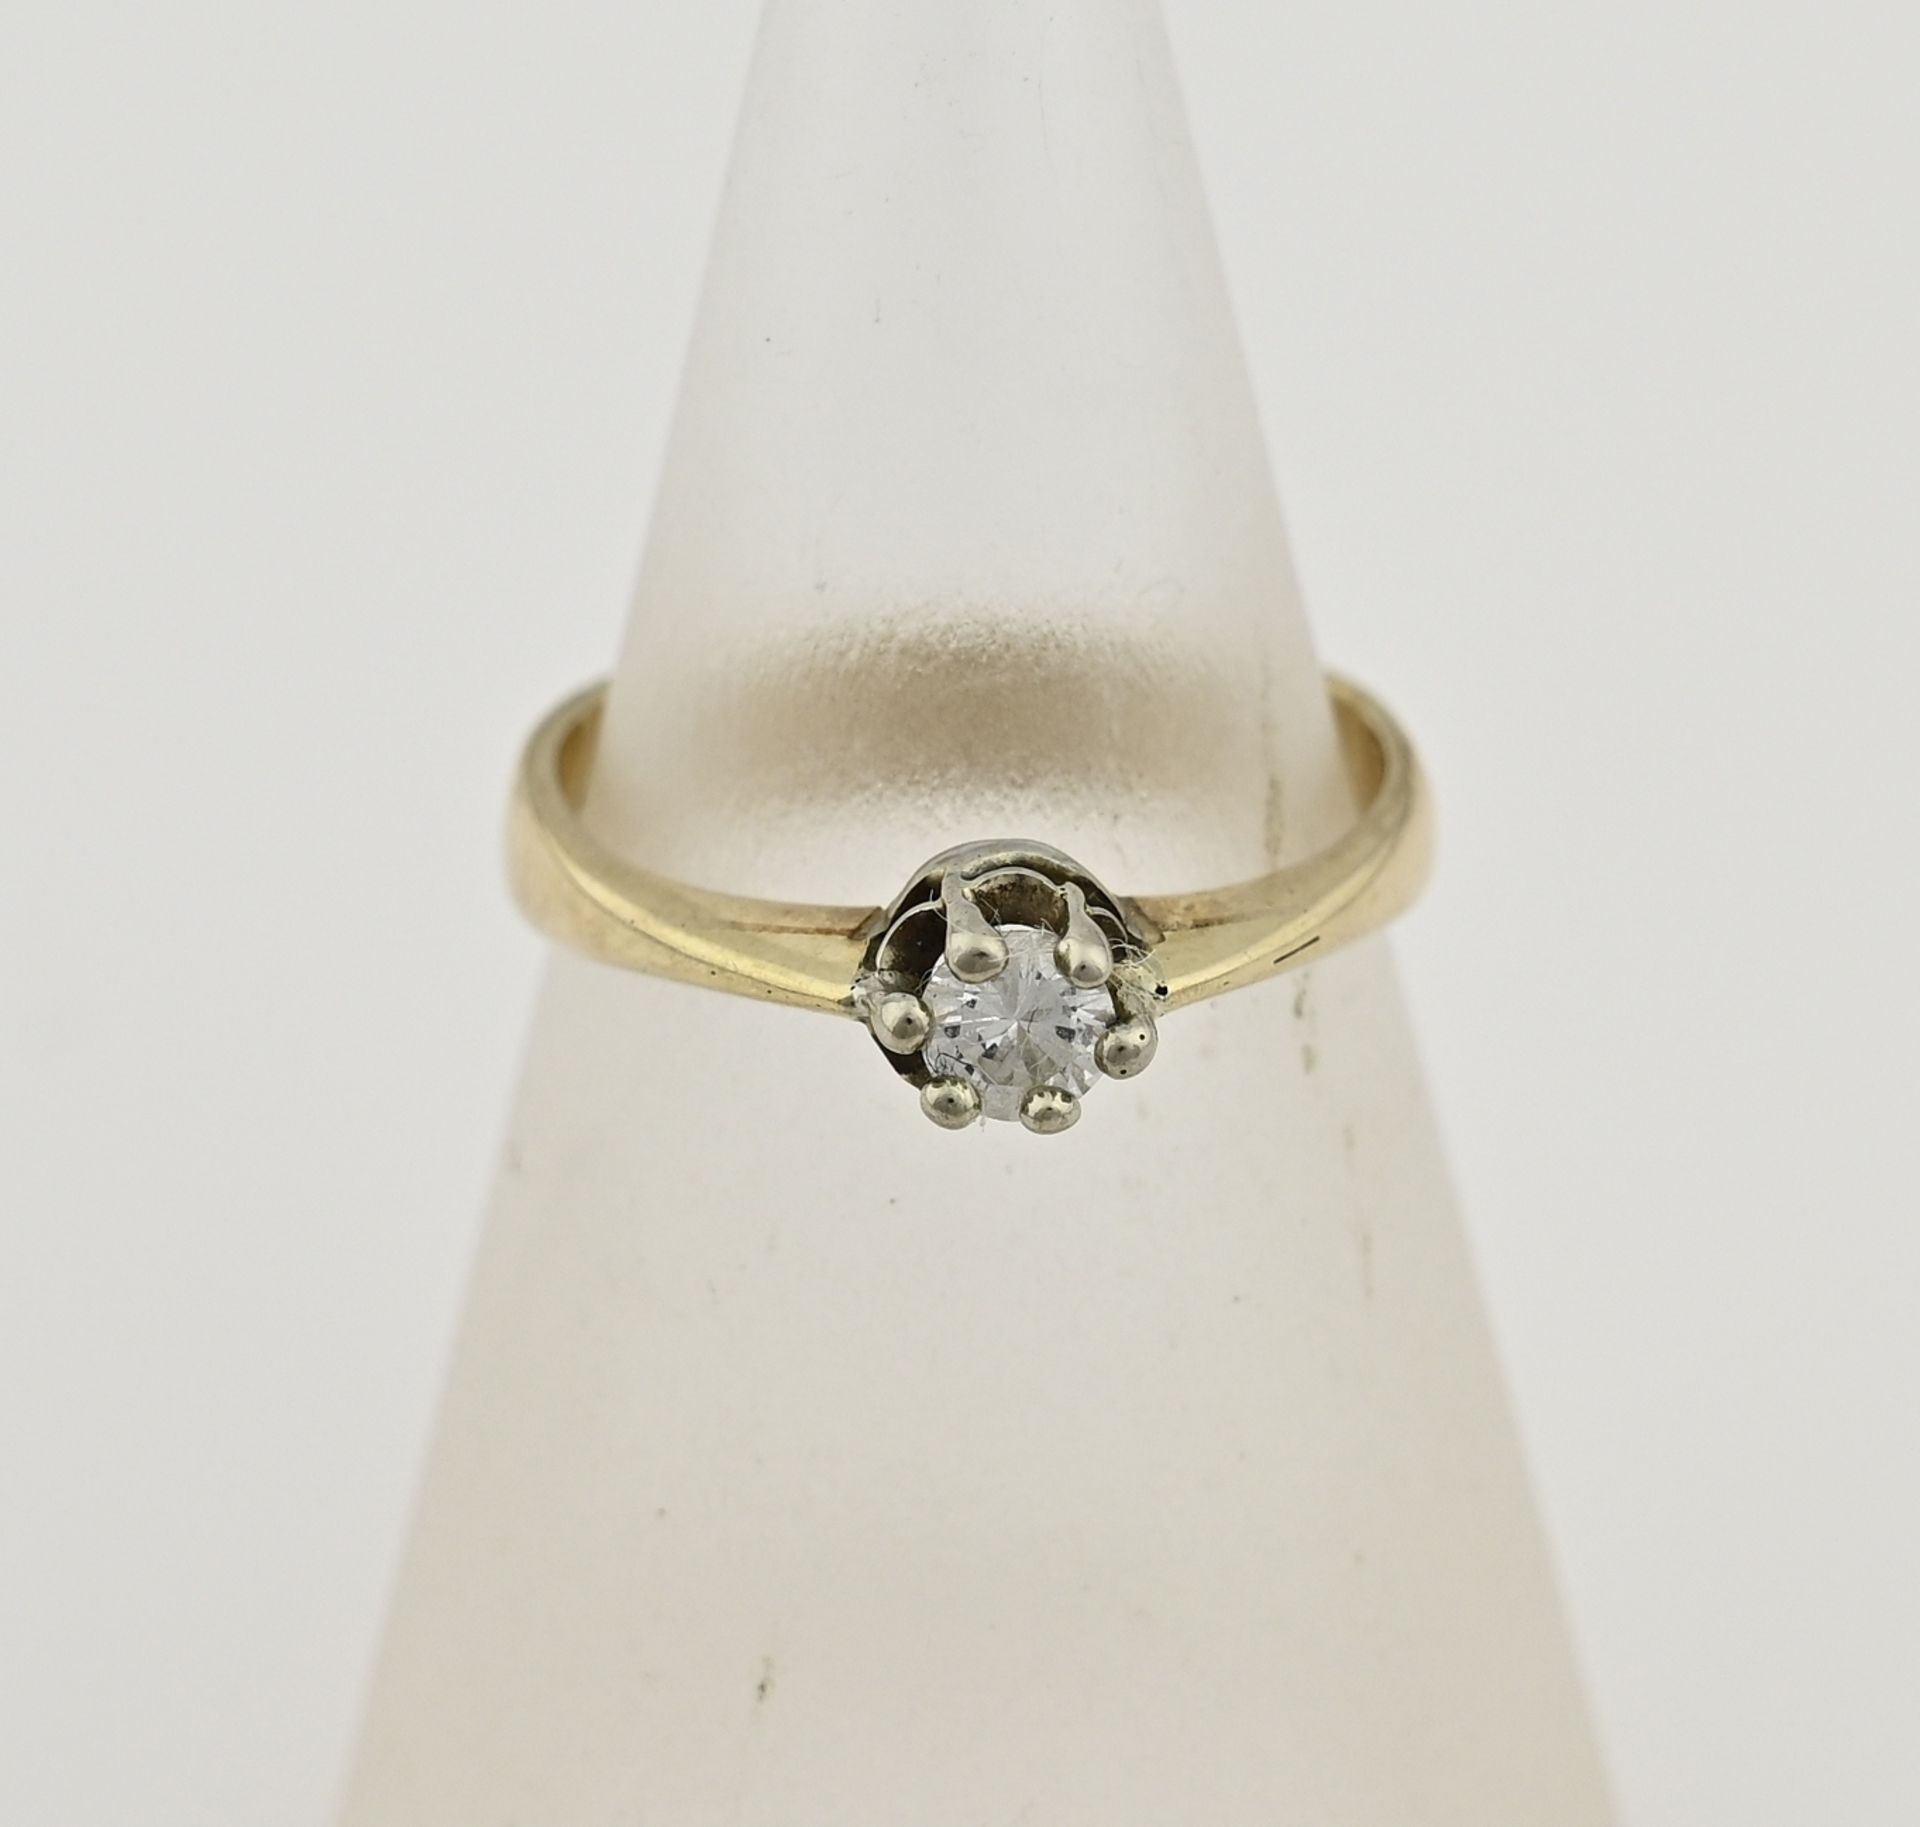 Gold solitaire ring with diamond, 0.25